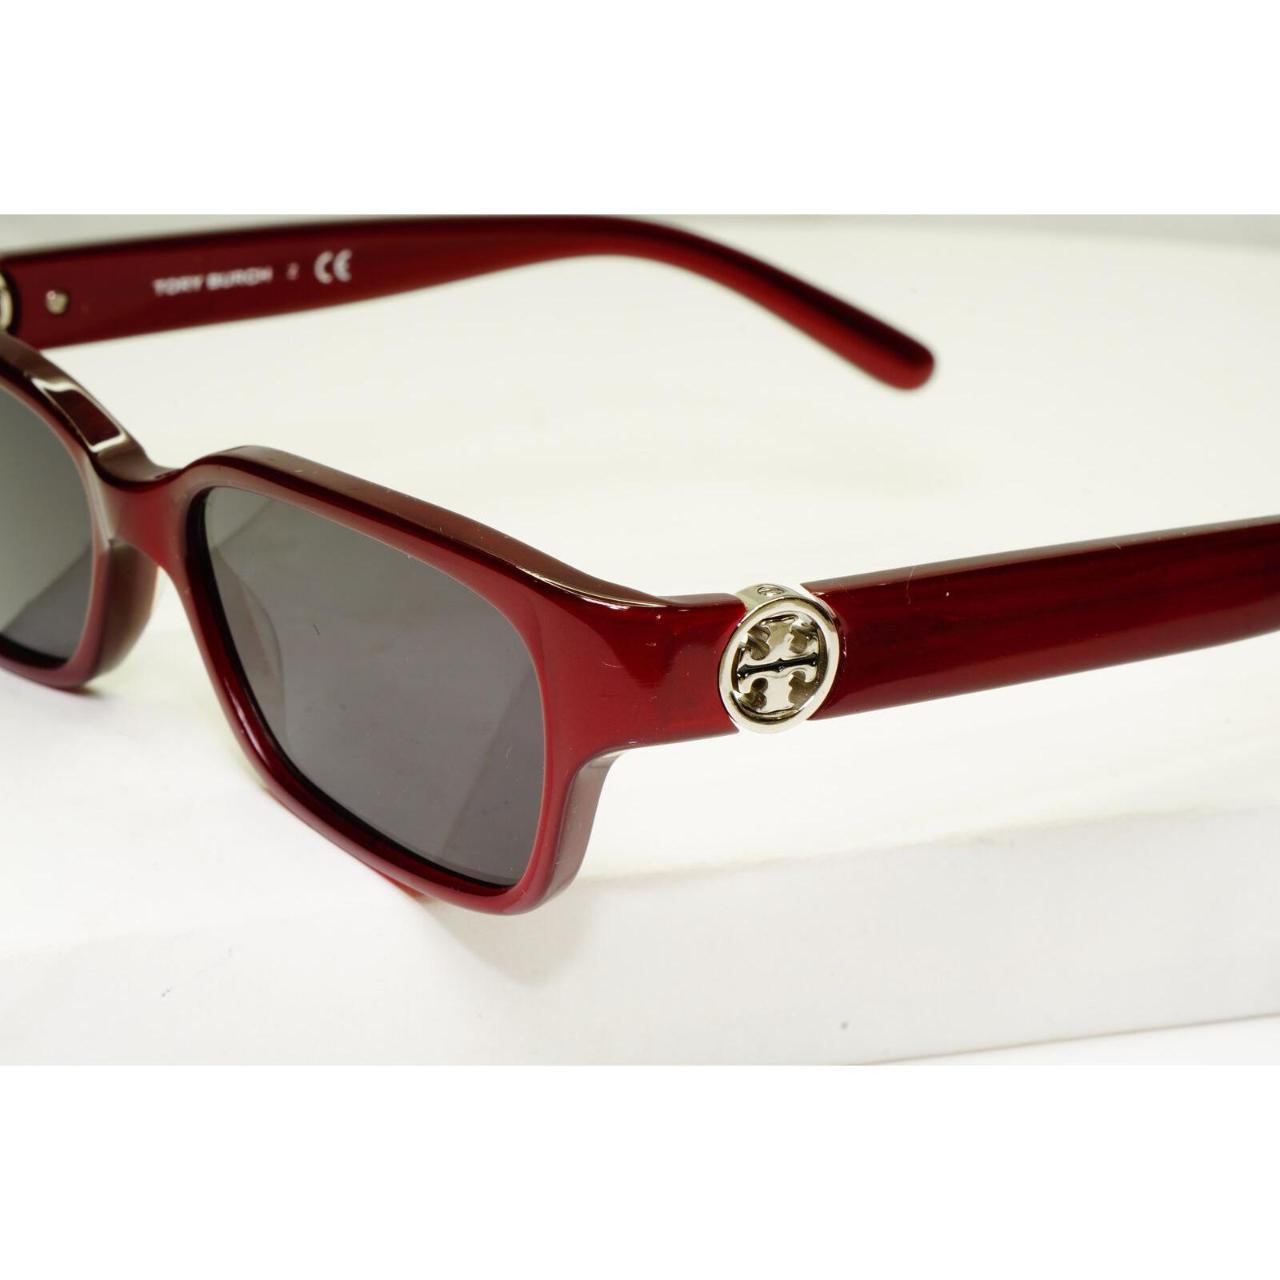 Product Image 3 - These sunglasses and all other